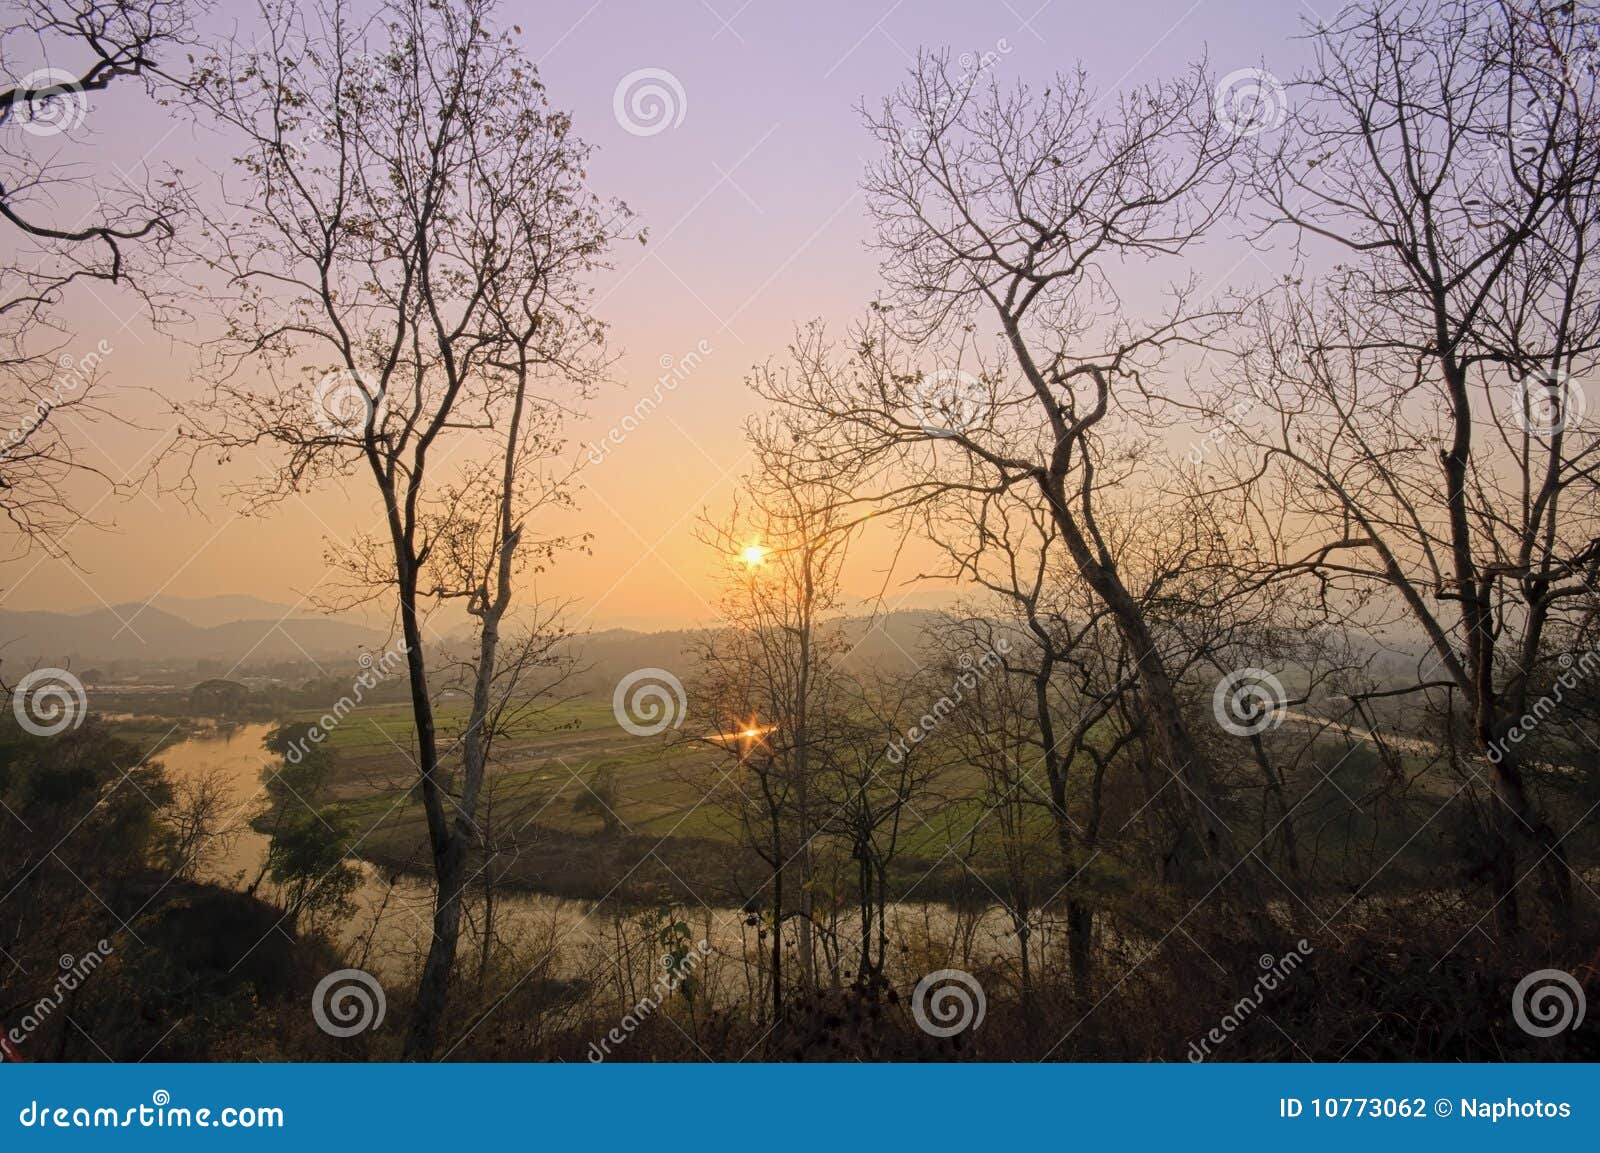 Pai river view Thailand stock photo. Image of silhouette - 10773062